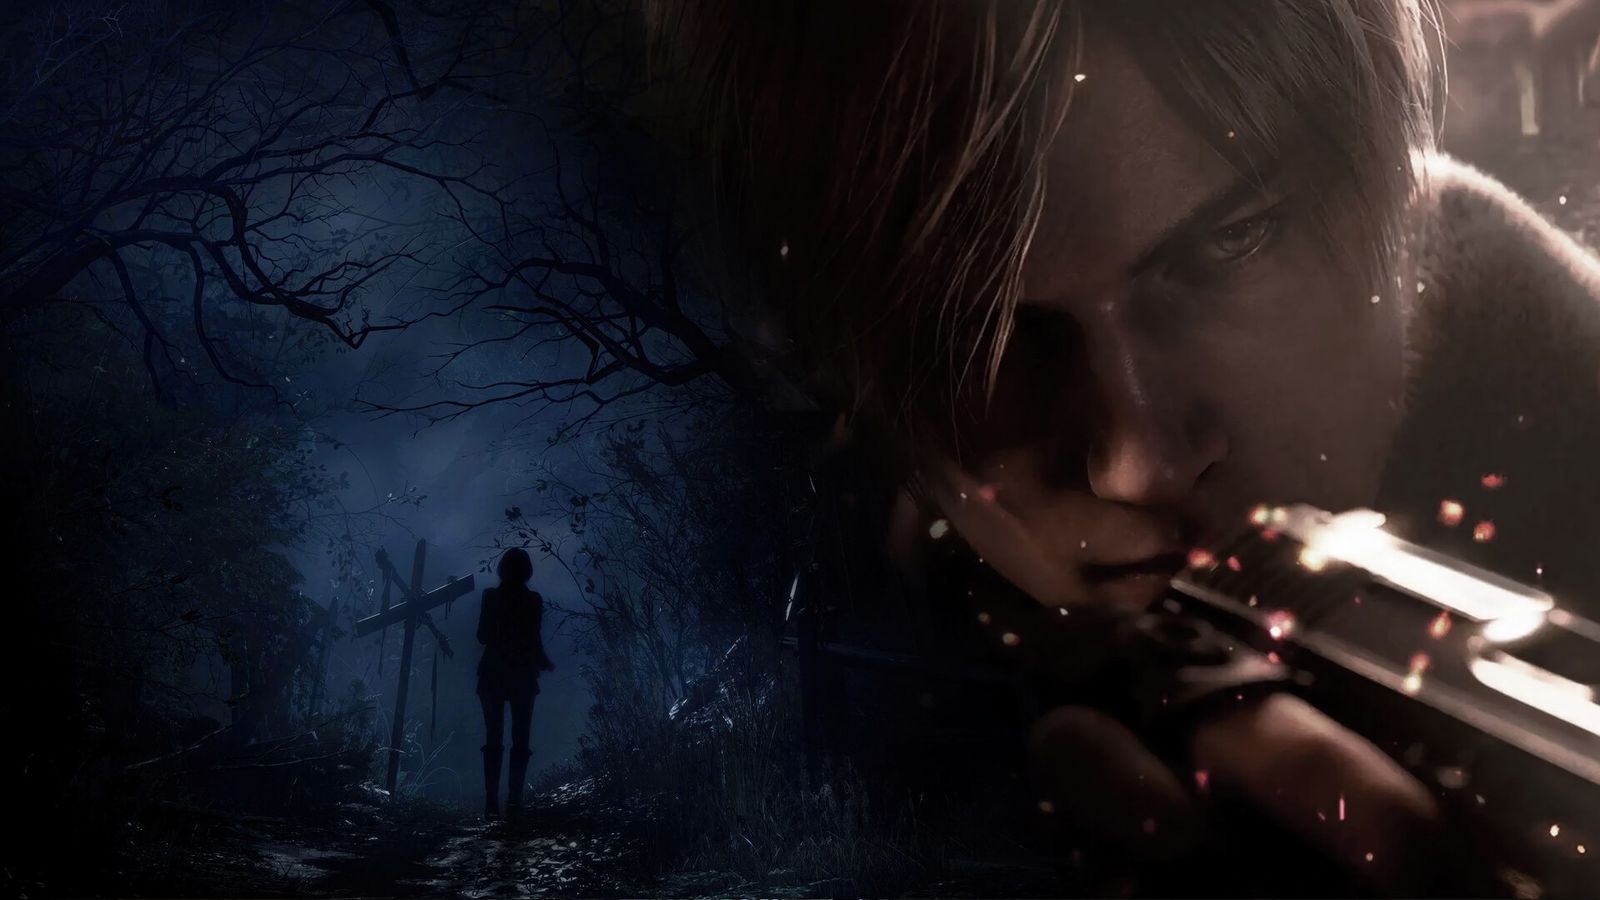 resident evil 9 graphic of leon kennedy aiming gun close up and silhouette on left